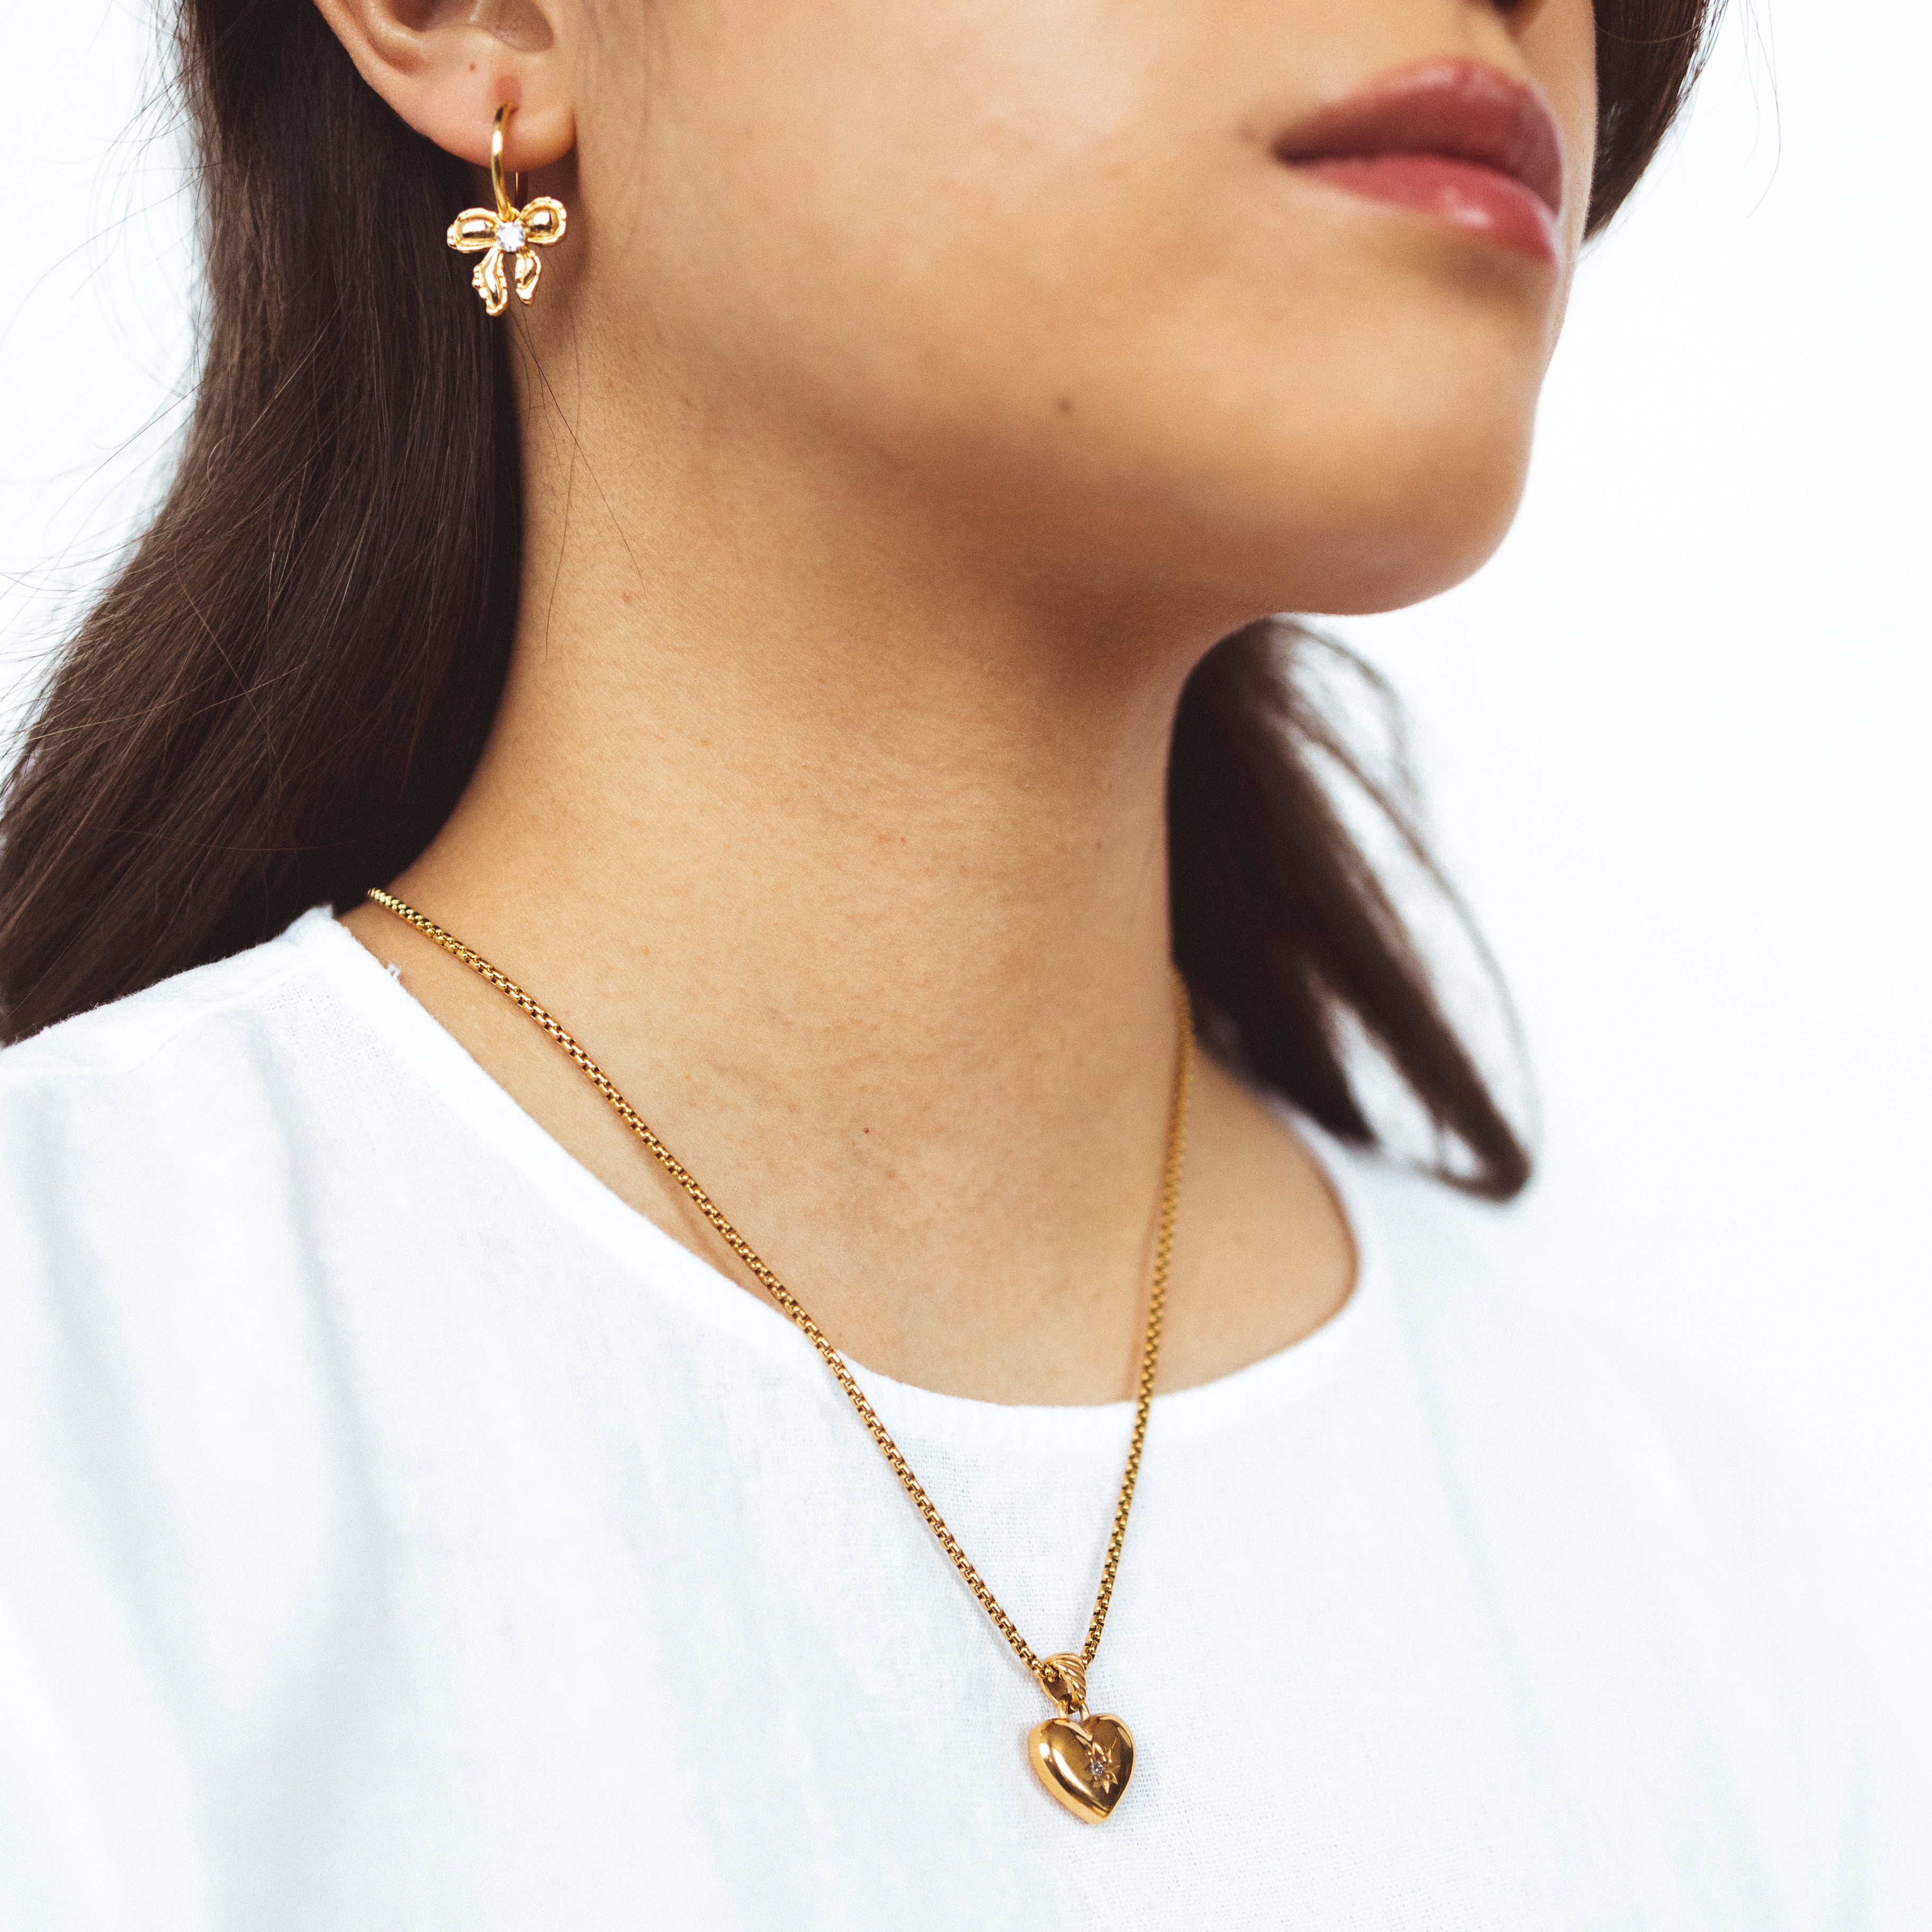 A model wearing the Jude Heart Necklace is expertly crafted from 18K Gold Plated Stainless Steel, resulting in a durable and water-resistant accessory. Its adjustable chain allows for a customized fit. Elegant and functional, this single necklace is a must-have for any jewelry collection.